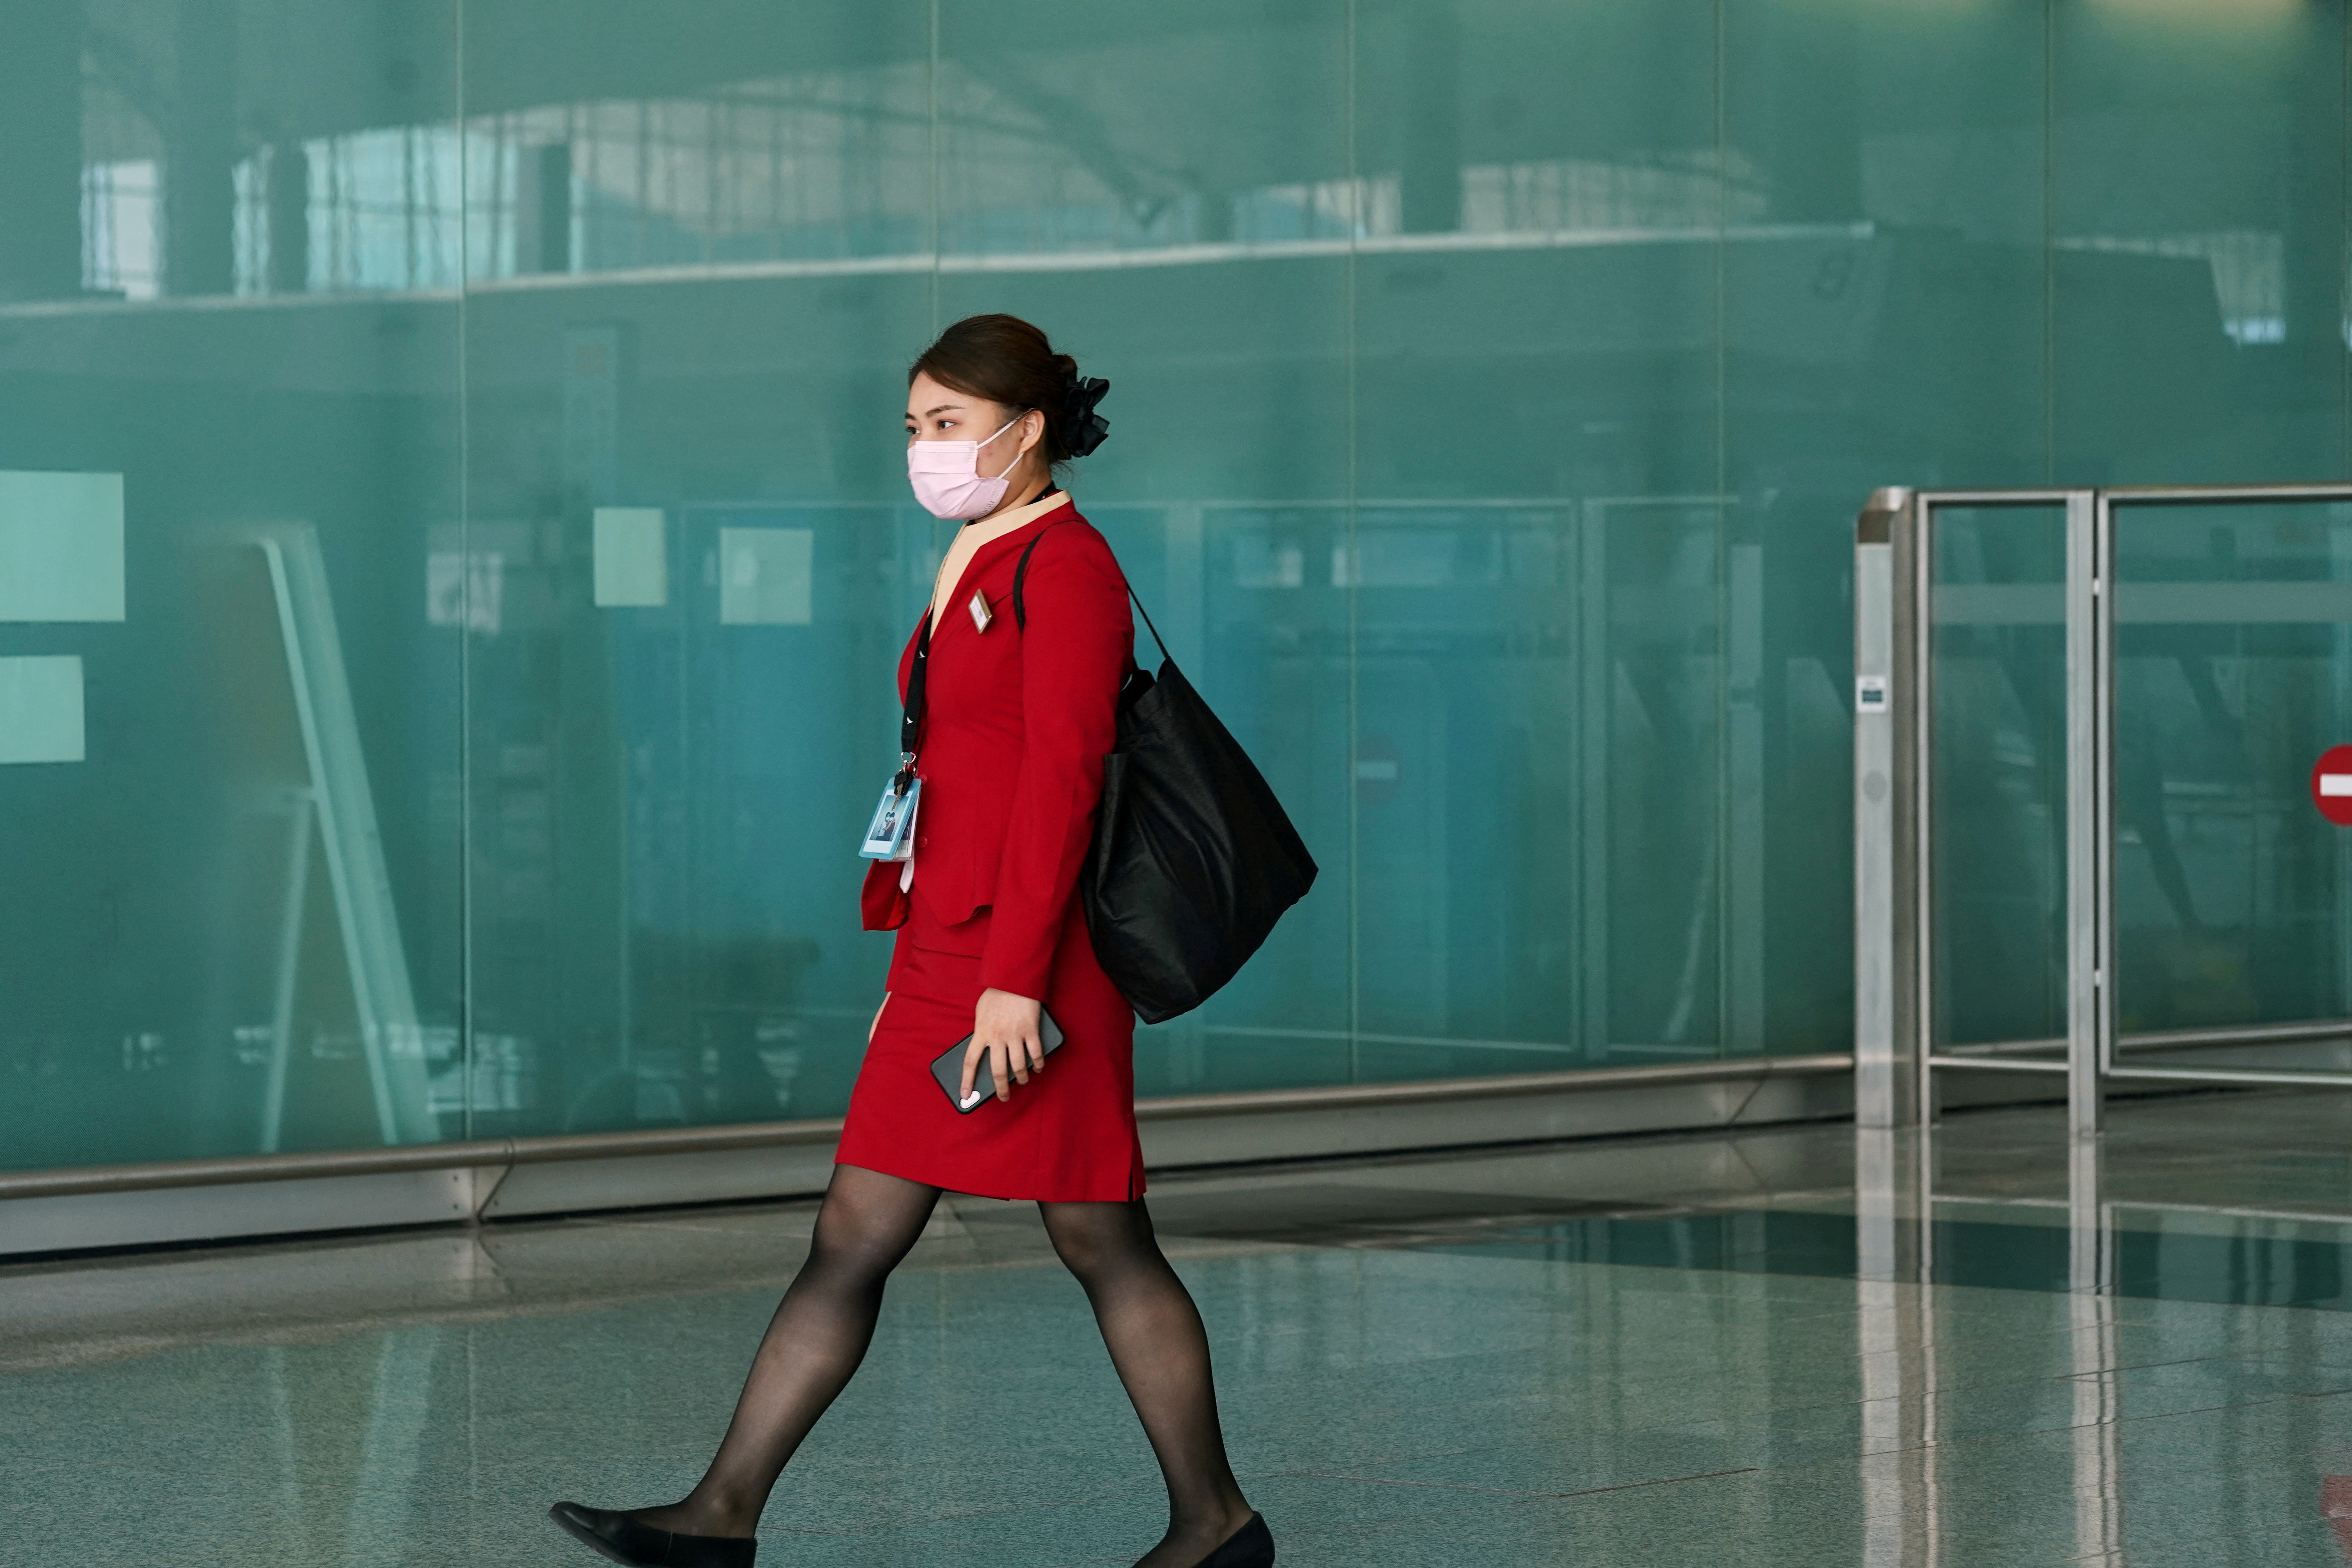 Cathay needs to boost staff morale, union says, after "blanket-carpet" furore